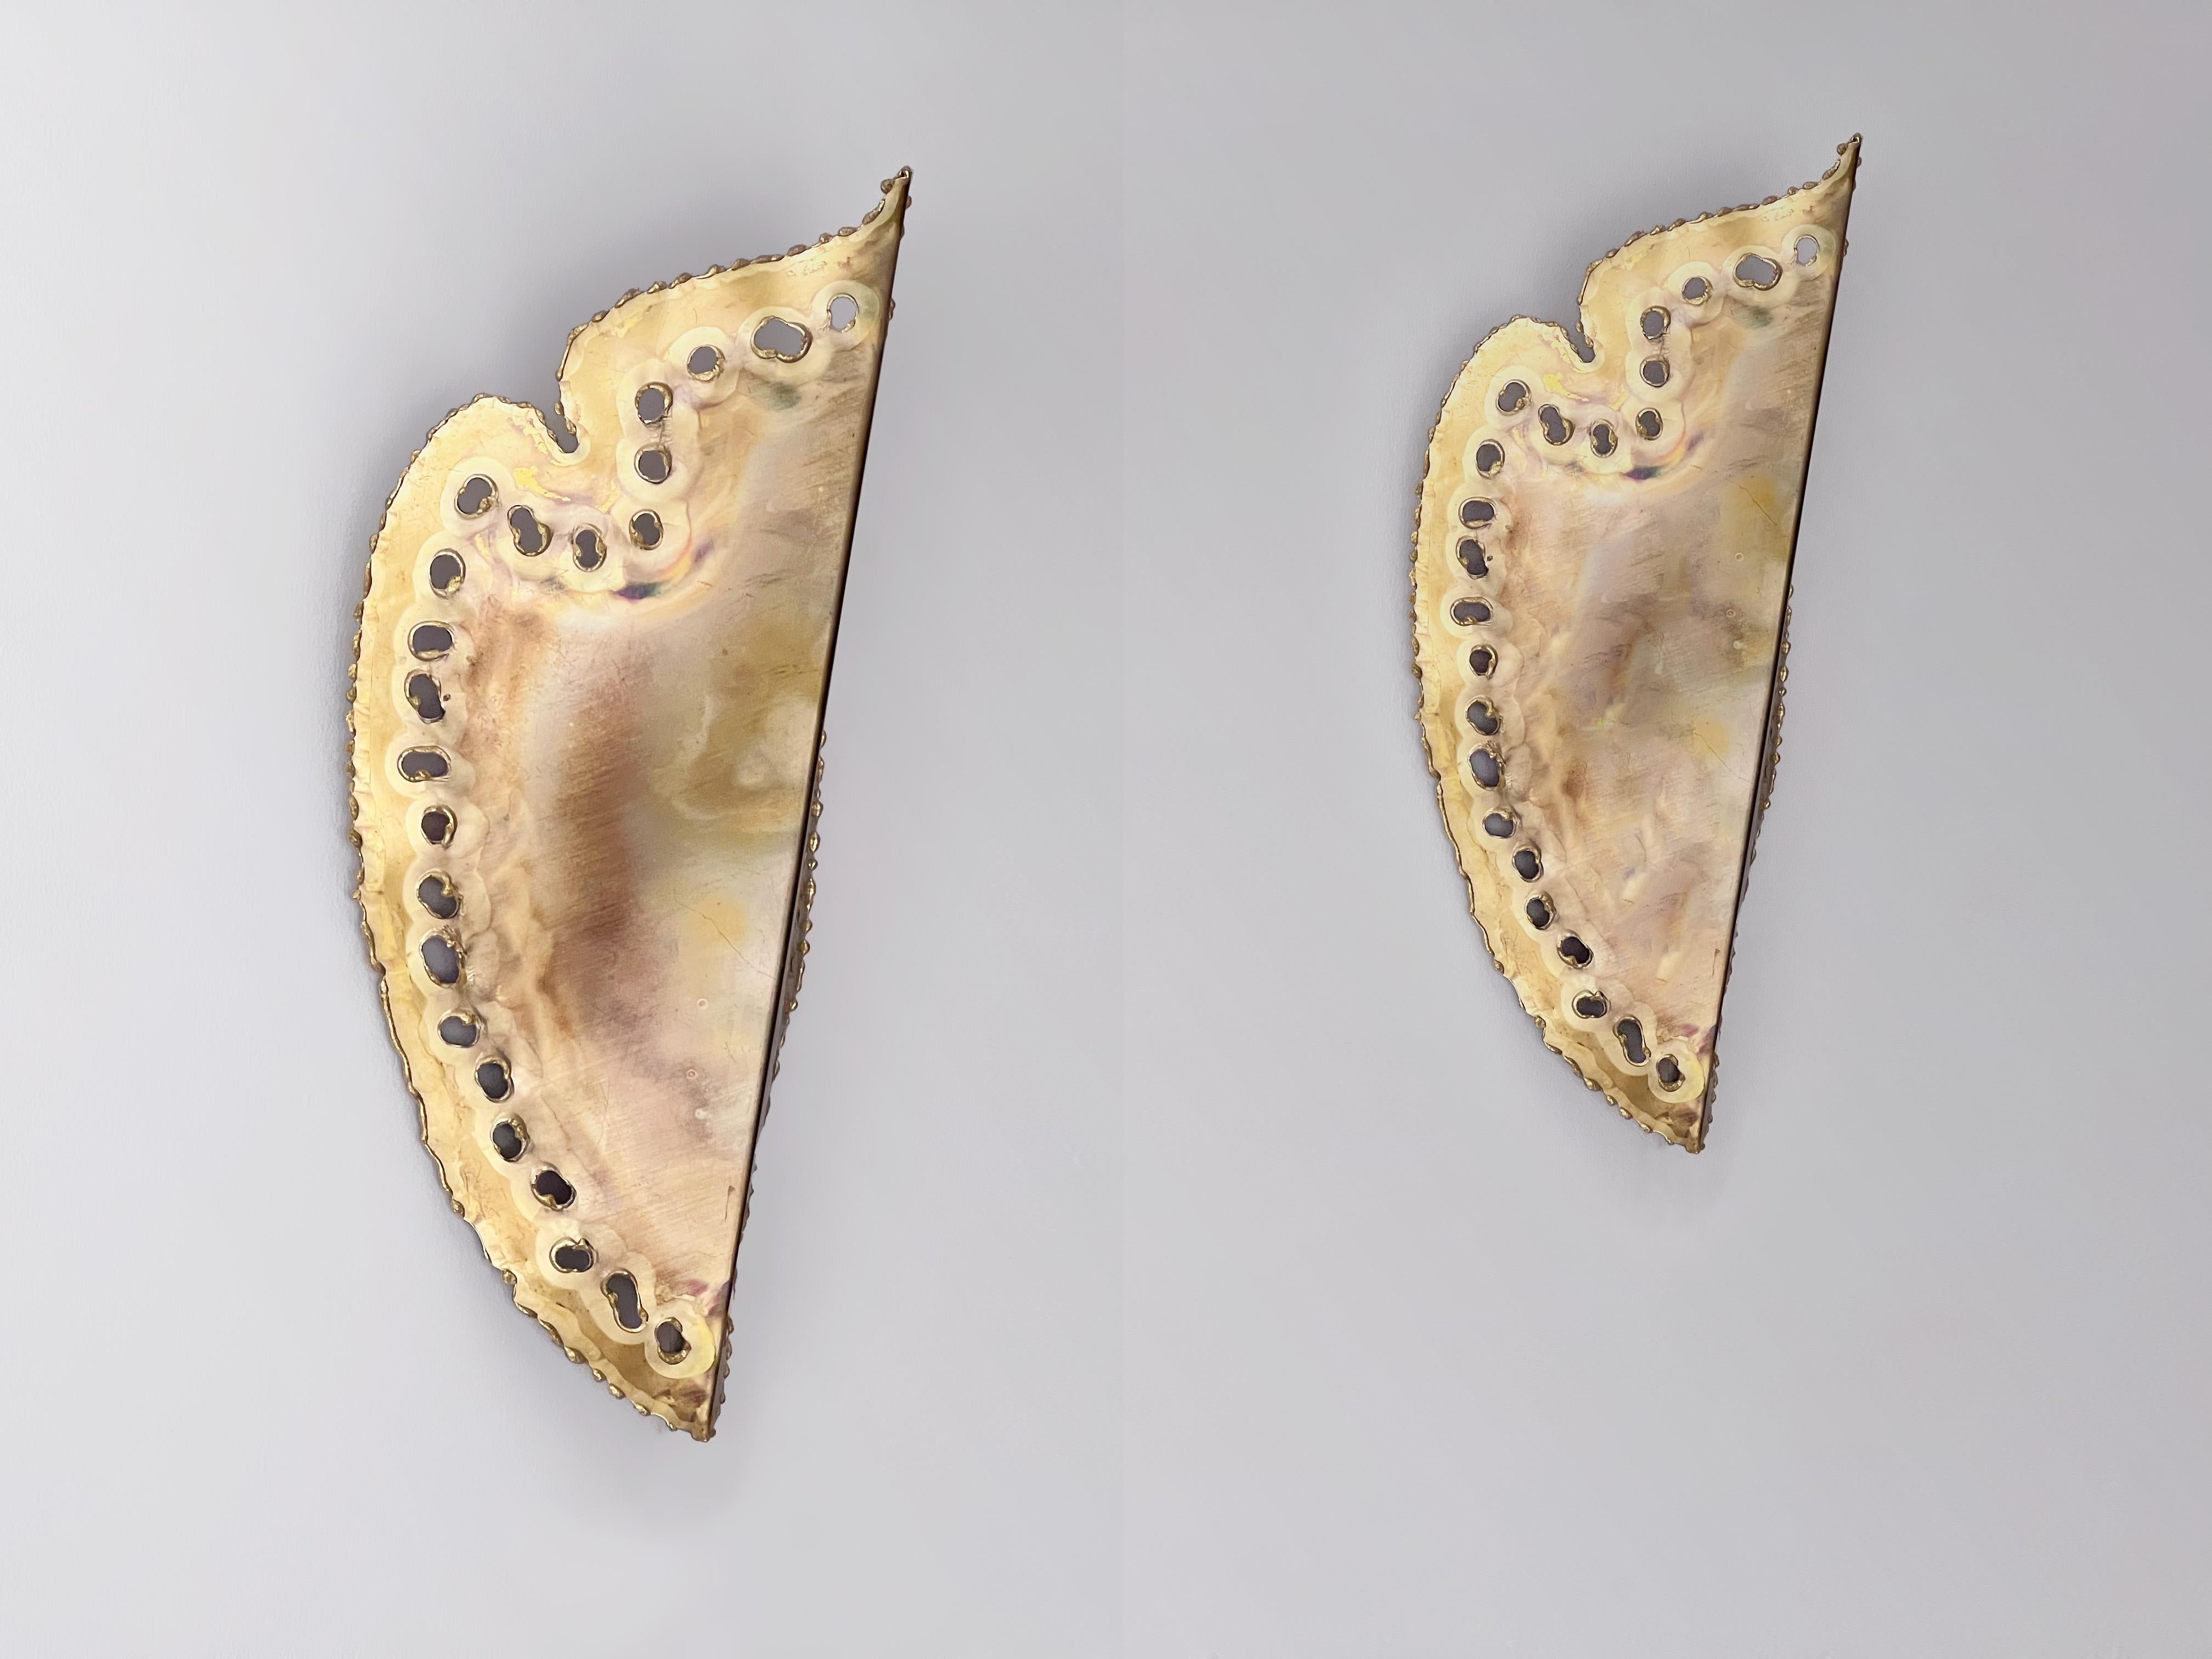 A pair of Scandinavian mid-century brutalist sconces by Svend Aage Holm-Sørensen. Leaf shaped brass with a vertical crease at the center, torch cut with perforations along the edges. Labeled “Holm-Sørensen & Co, Made In Denmark”. Holds one E14 bulb